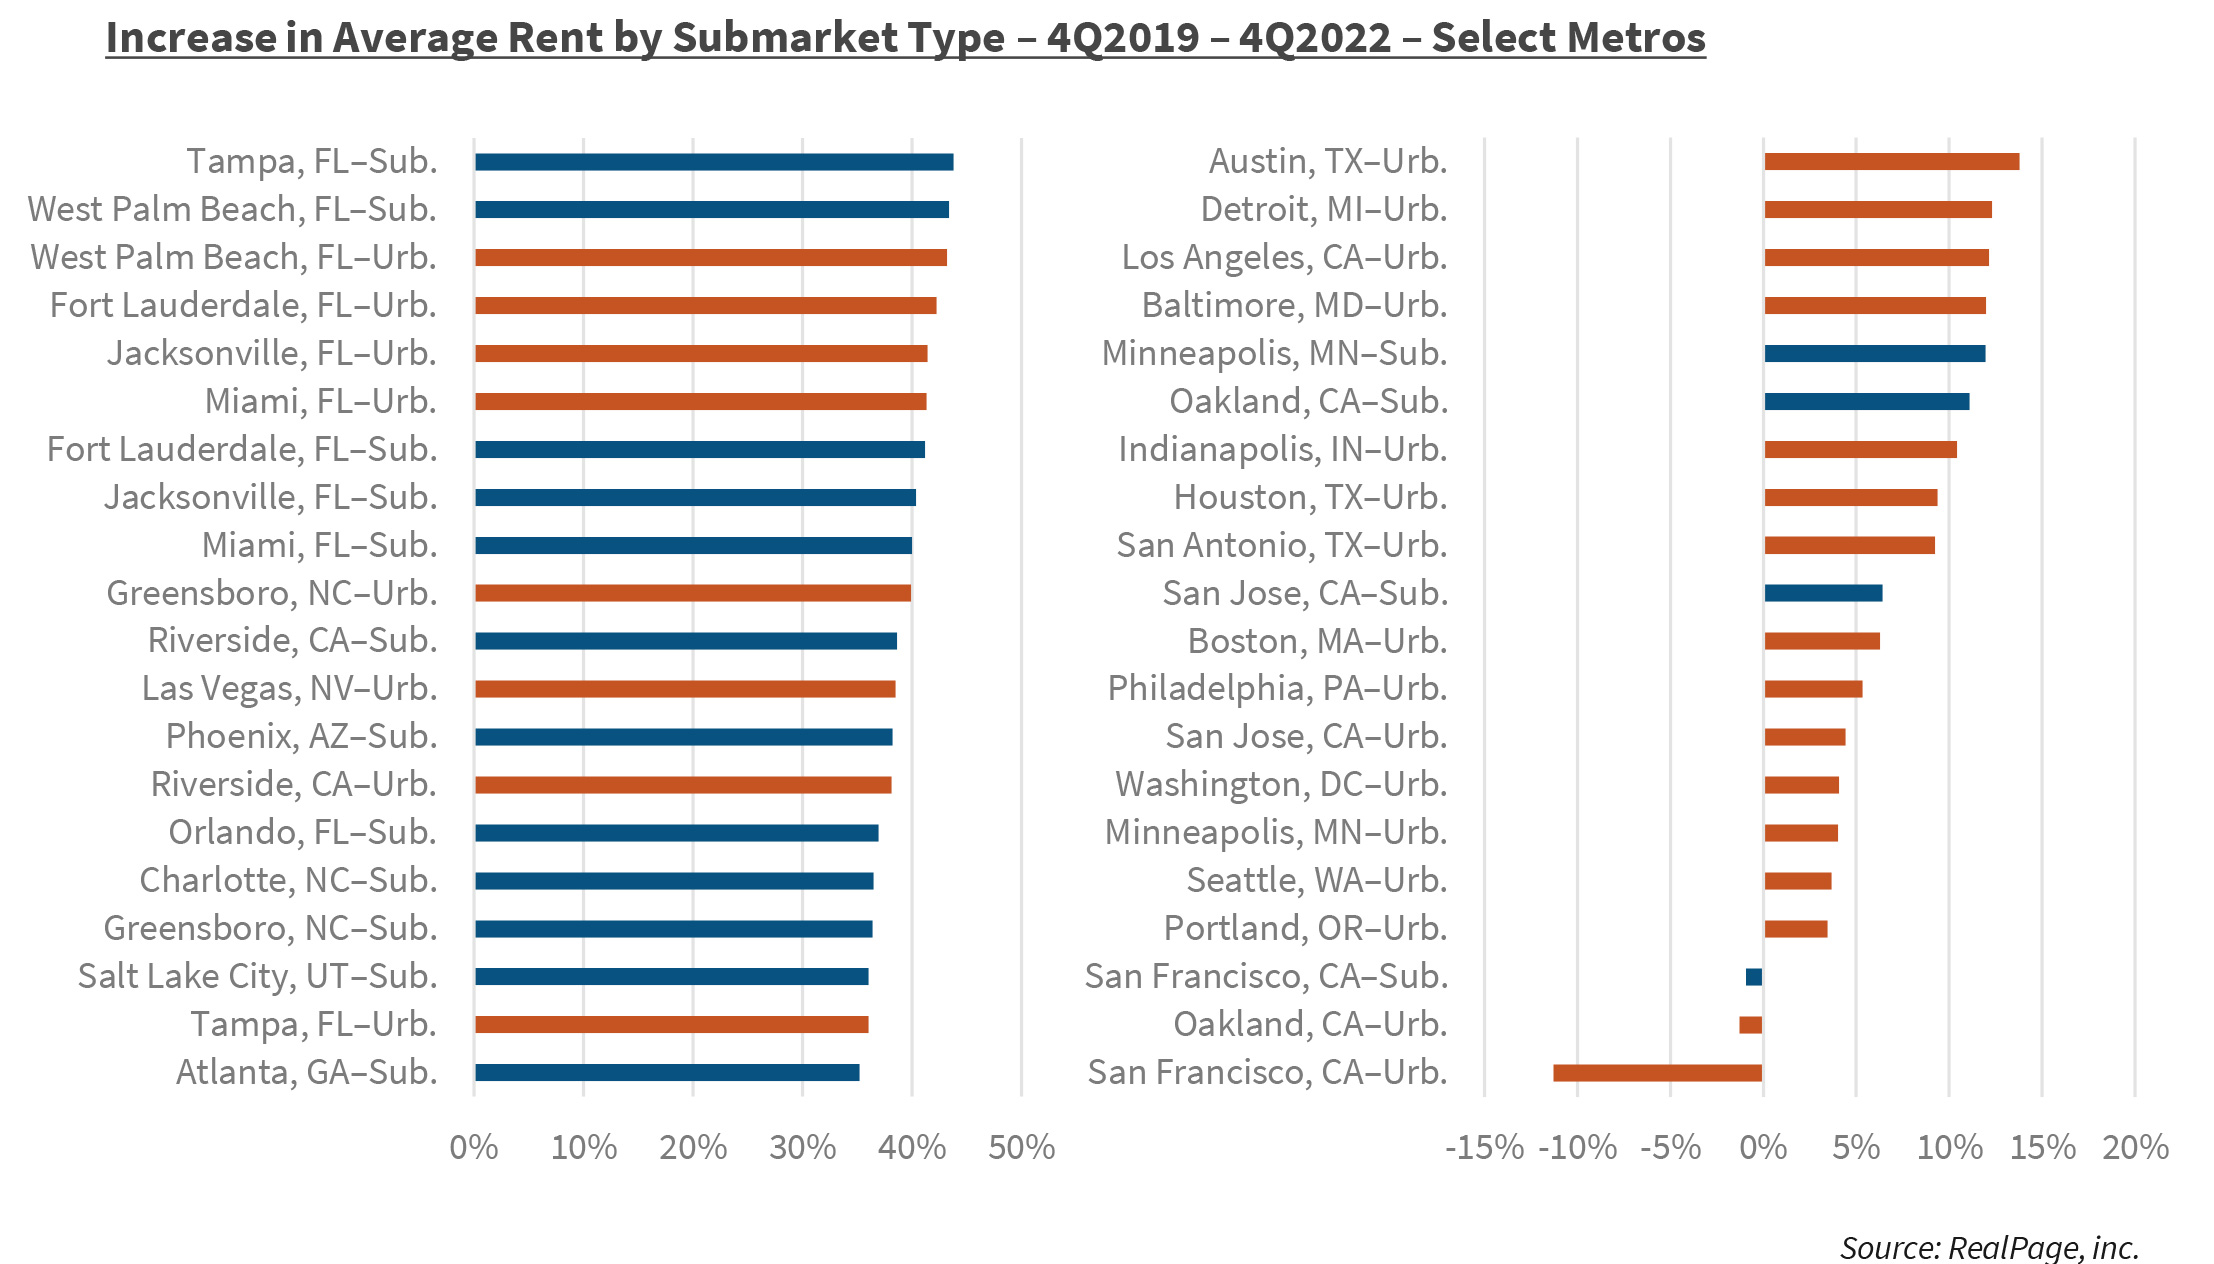 Increase in Average Rent by Submarket Type – 4Q2019 – 4Q2022 – Select Metros